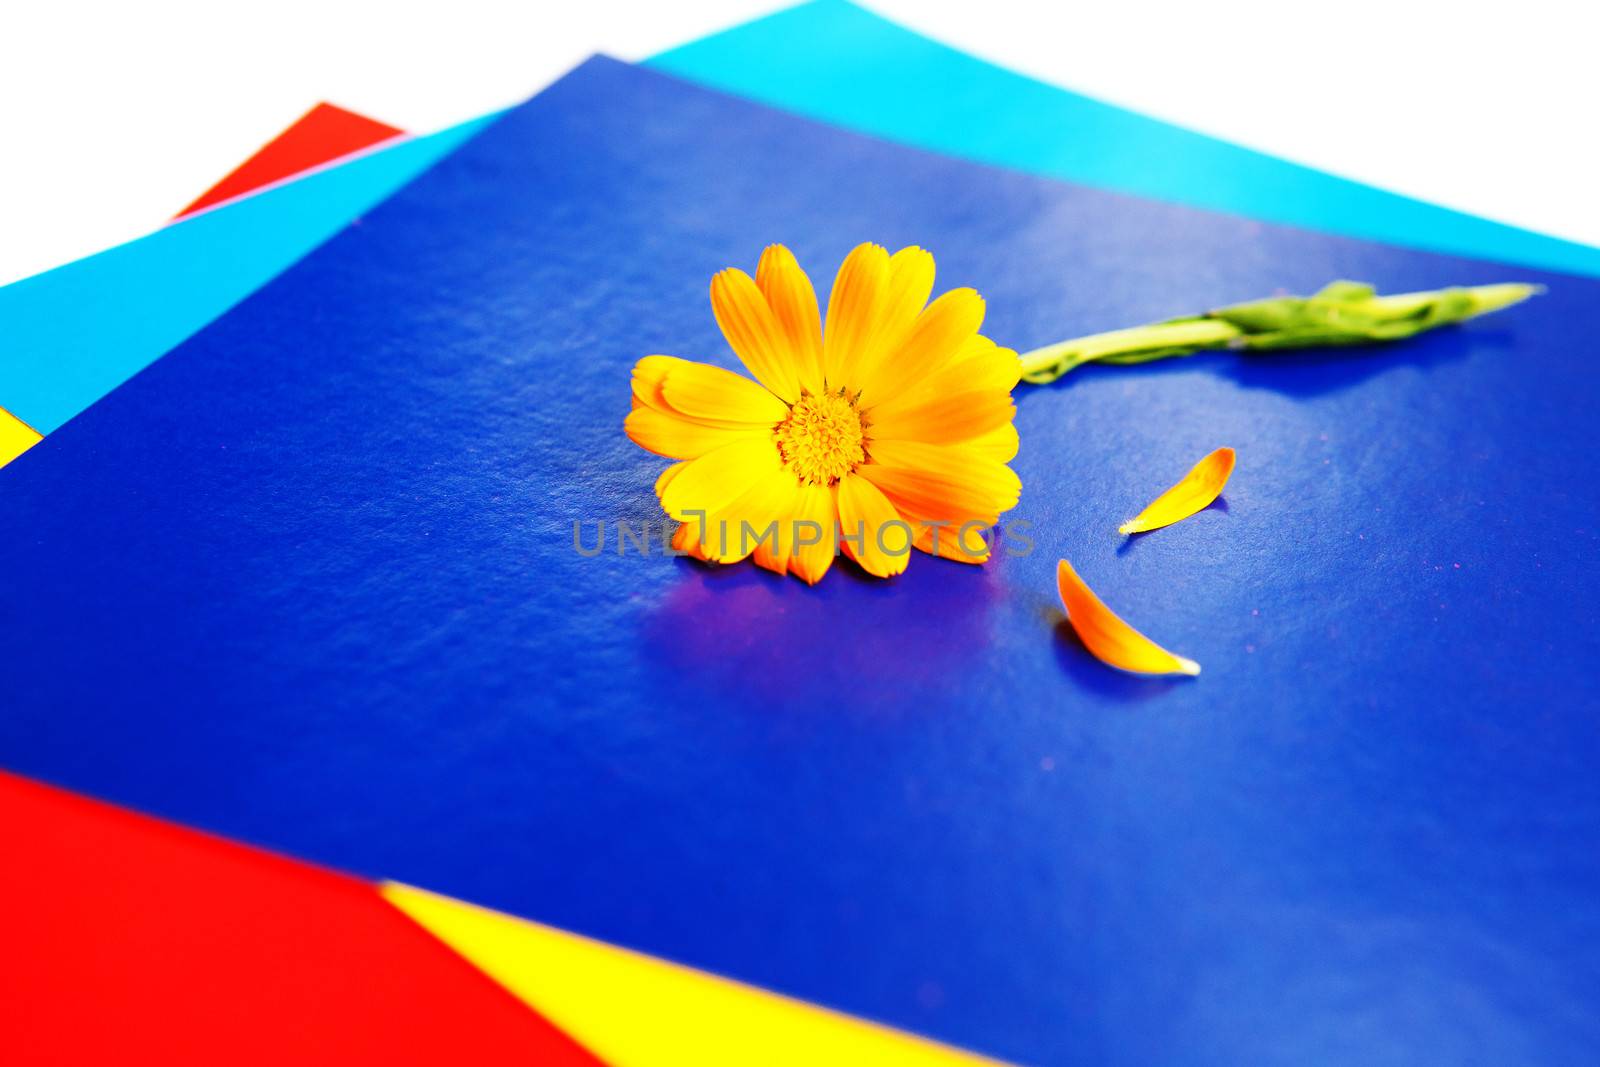 flower on the pieces of paper by vsurkov